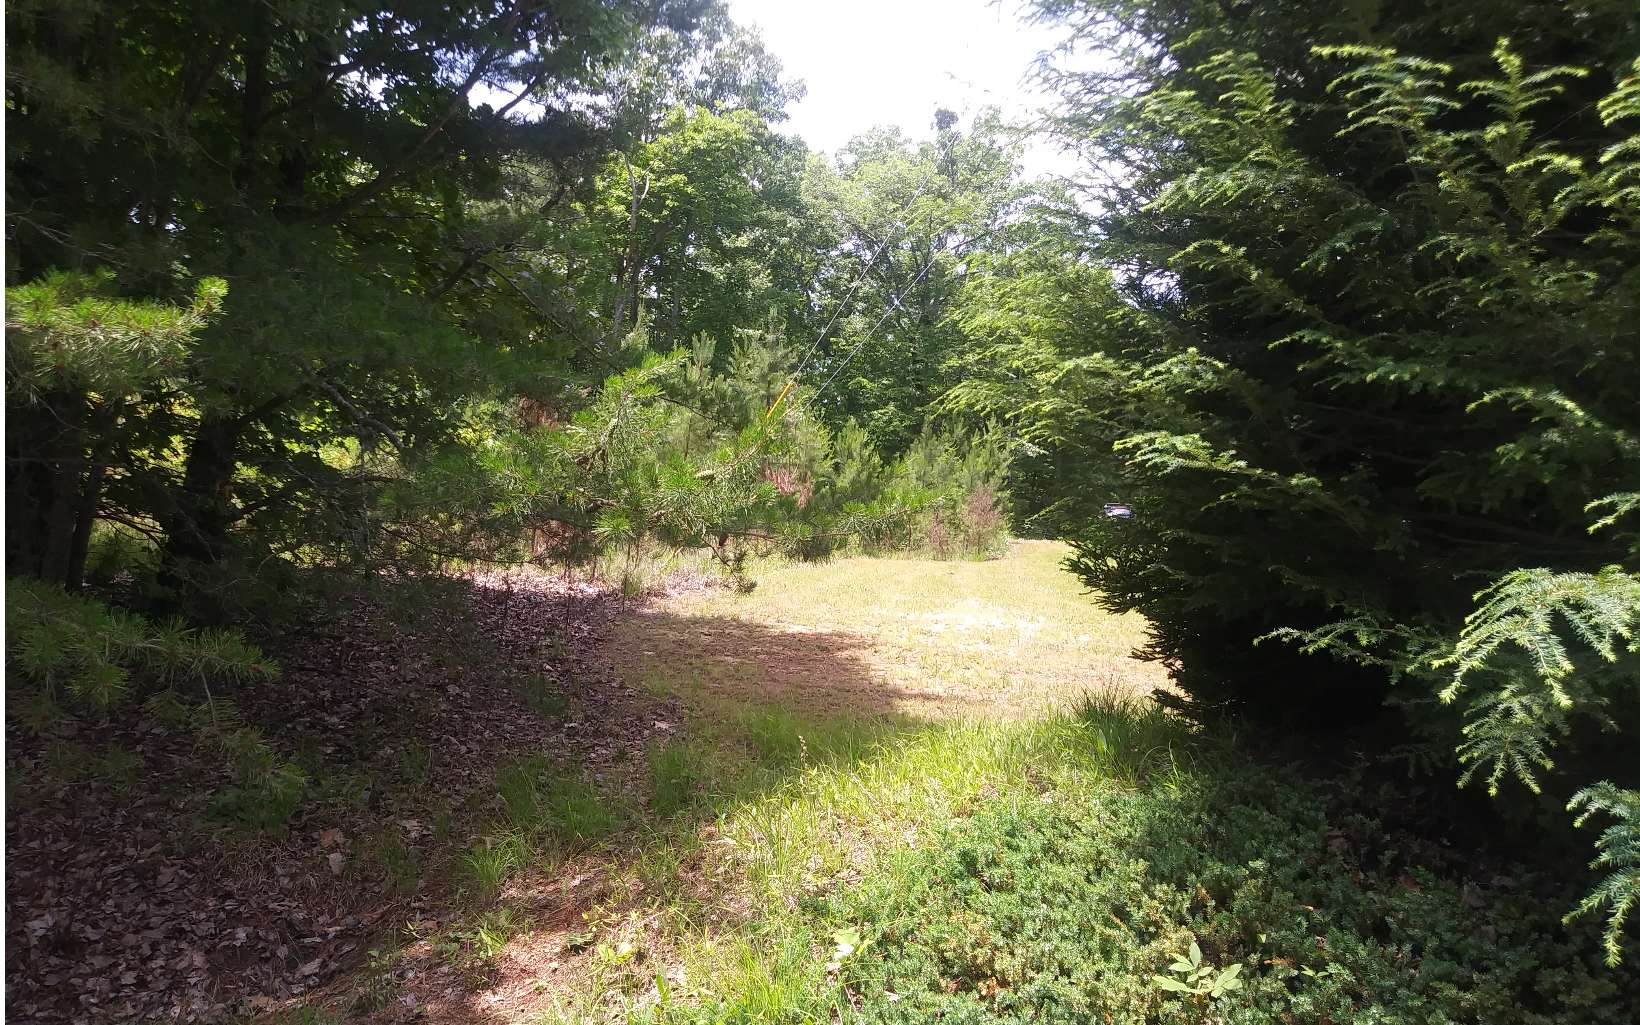 Come build your mountain home in desirable area only 10 minutes from Carters Lake. Fishing, boating, camping, and hiking only moments away. Ideally located between Ellijay and Chatsworth with mostly paved roads leading to the property (last 100 ft is gravel). Heavily wooded corner lot with approx 208 feet along Lakeland Drive. Great for cabin or full time home. No mobile or manufactured homes permitted. Electricity (Amicalola EMC) and internet (ETC) available. Lot will require septic and private well. HOA is mandatory. Dues are $300/Year.